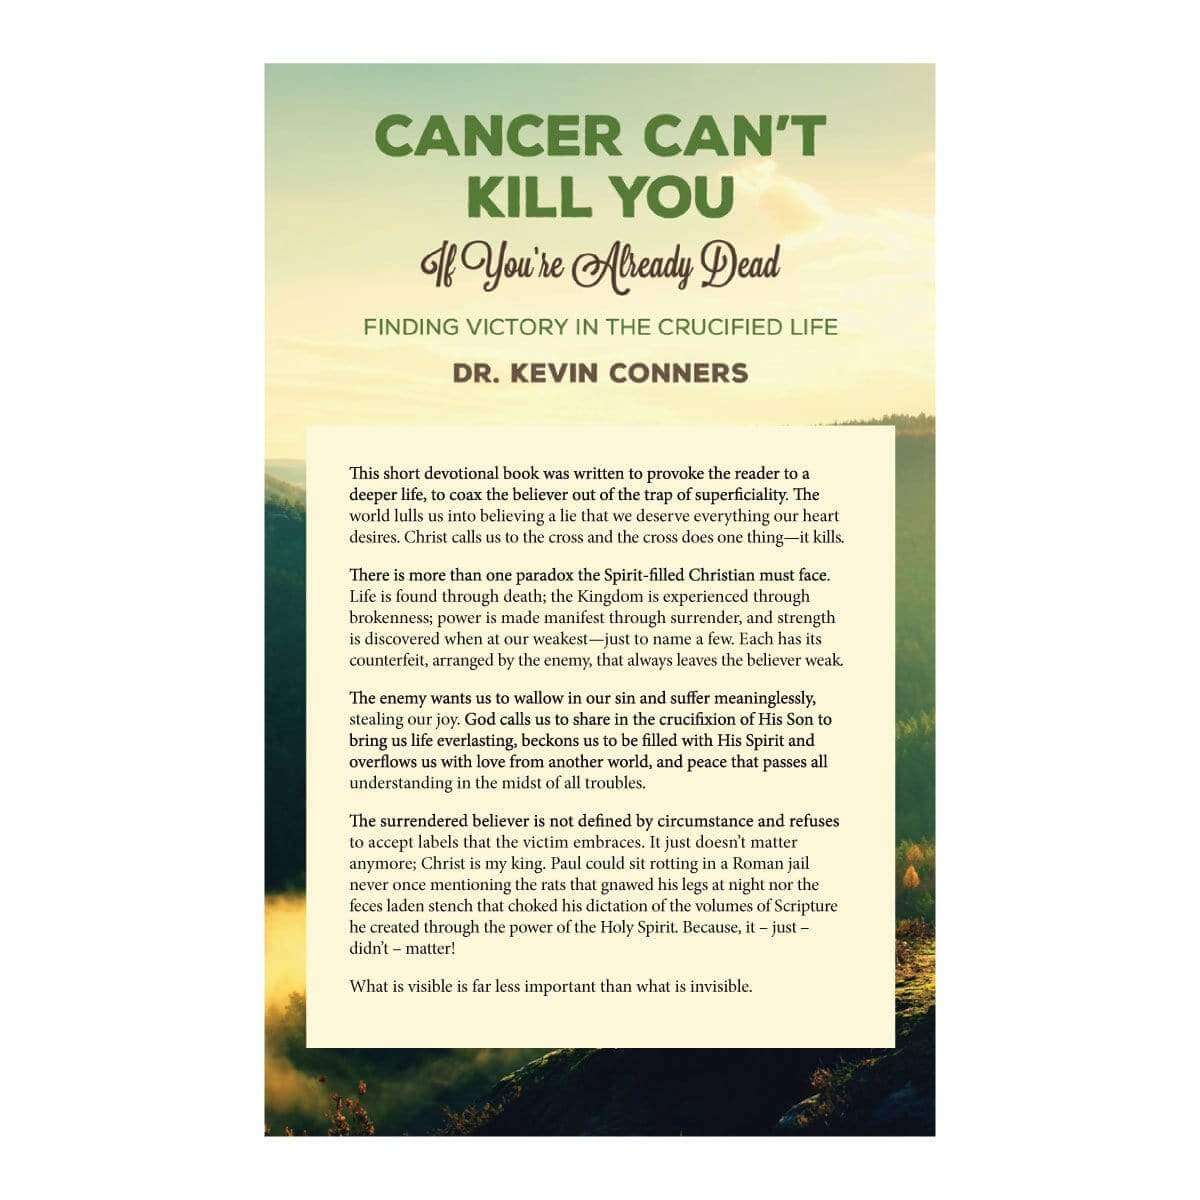 Cancer Can't Kill You if You're Already Dead Book Conners Clinic Book - Conners Clinic